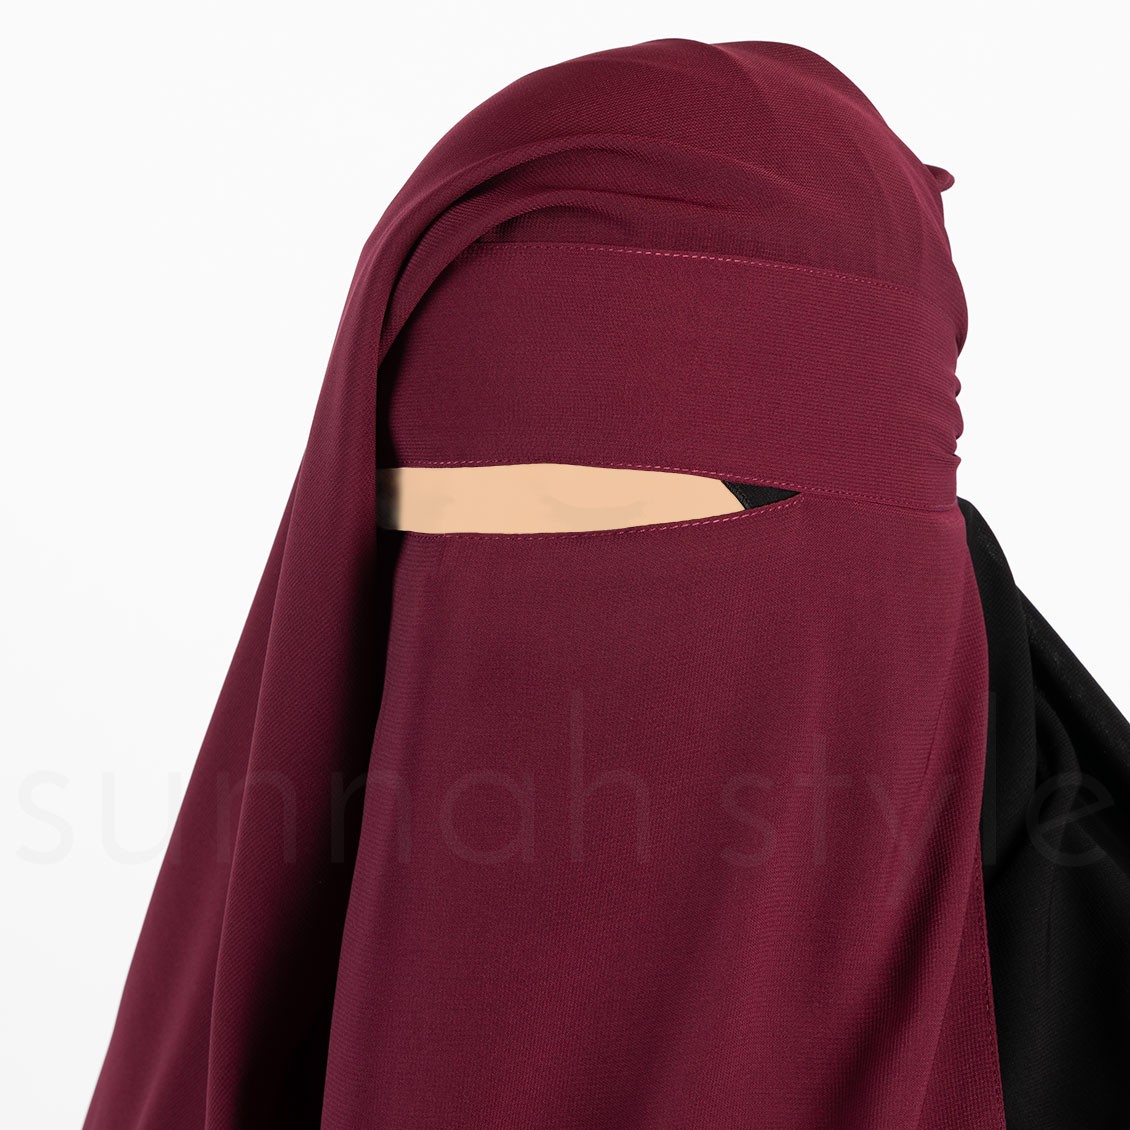 Sunnah Style Long Two Layer Niqab Burgundy